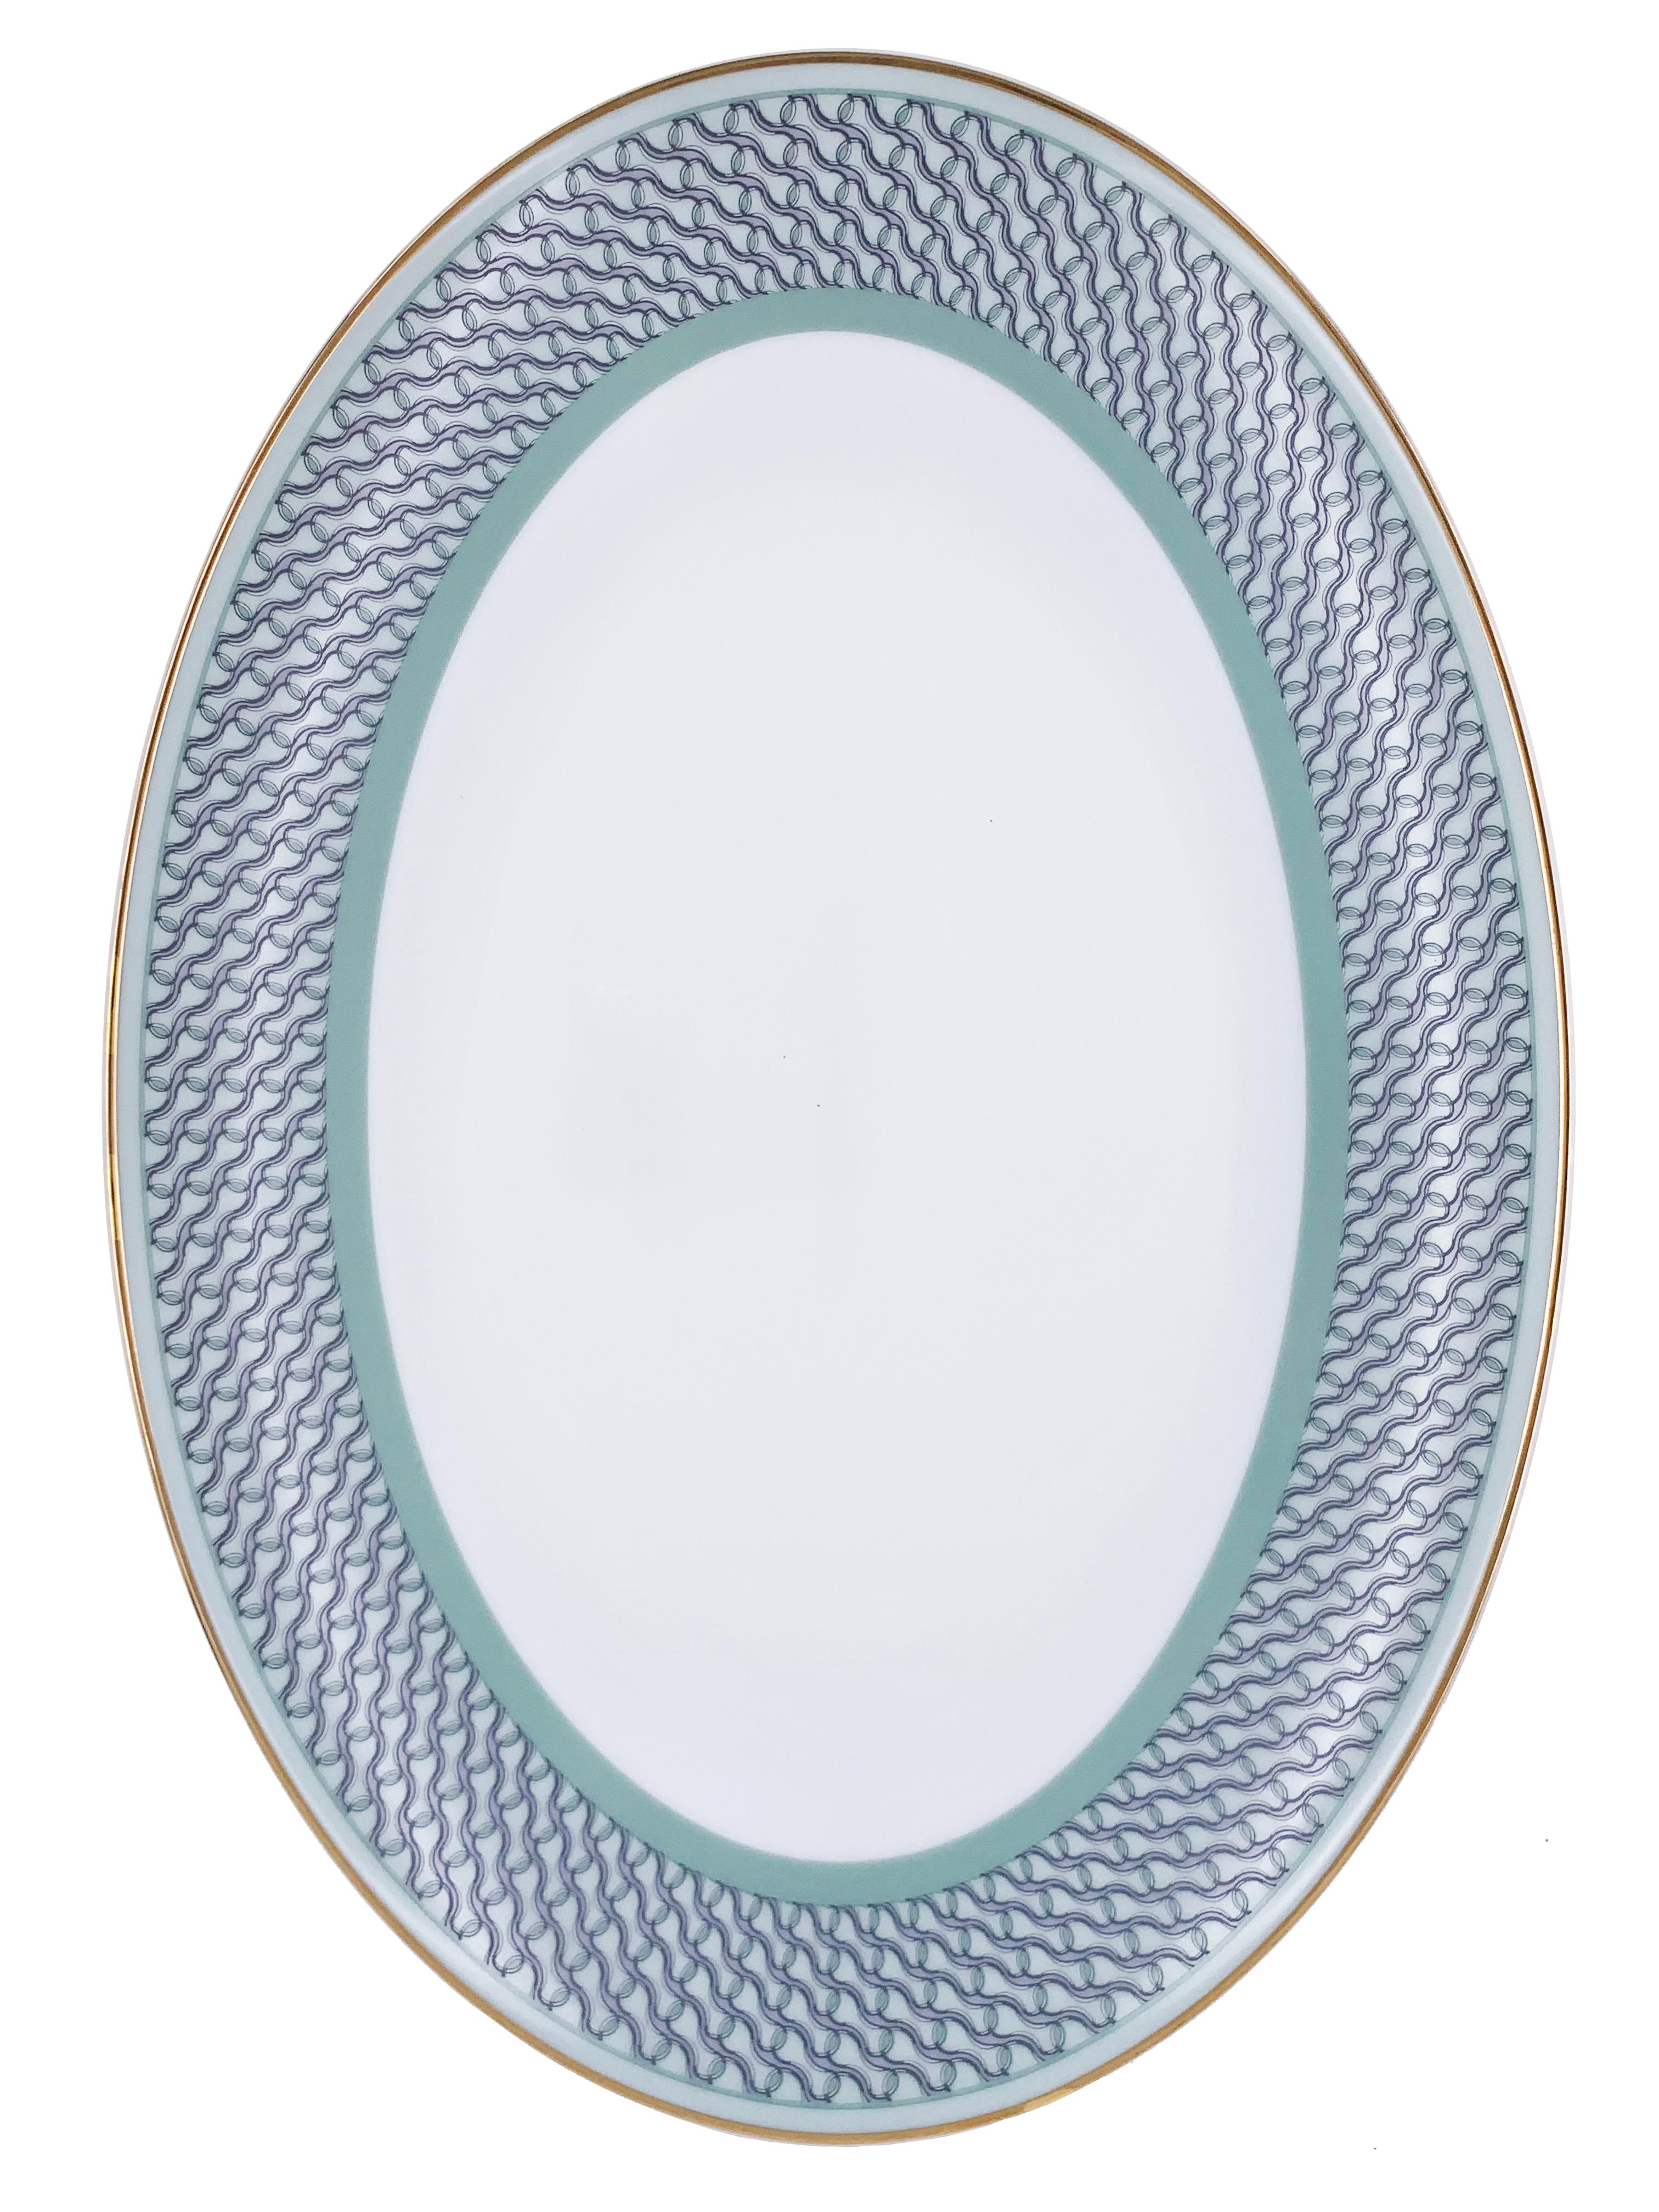 Larger quantities available upon request, with 8 weeks production time.

Description: Large oval serving plate
Color: Sage green
Size: 37 x 26 x 4H cm
Material: Porcelain and gold
Collection: Mid Century Rhythm